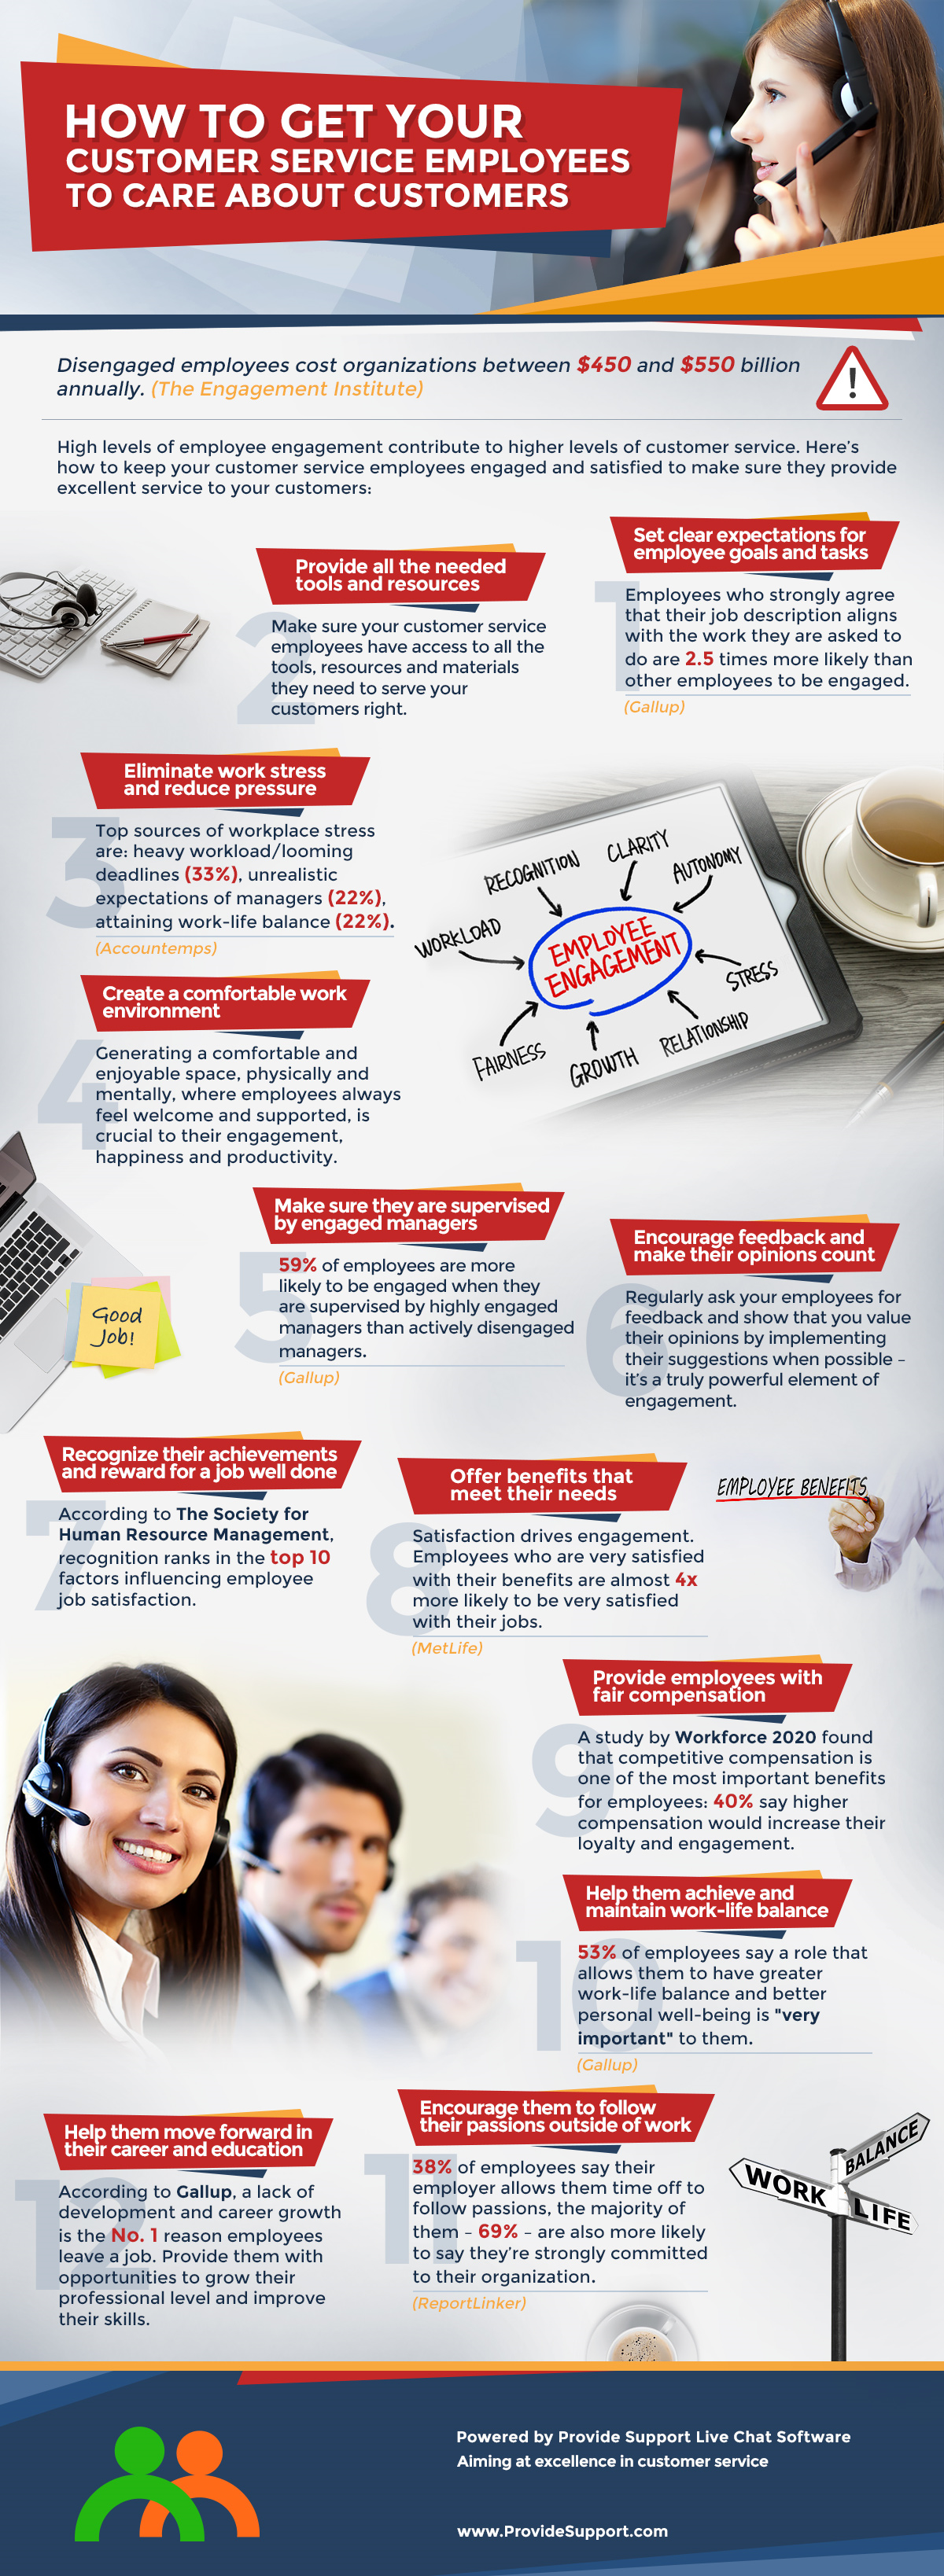 How to Get Your Customer Service Employees to Care About Customers [Inforgraphic from Provide Support]